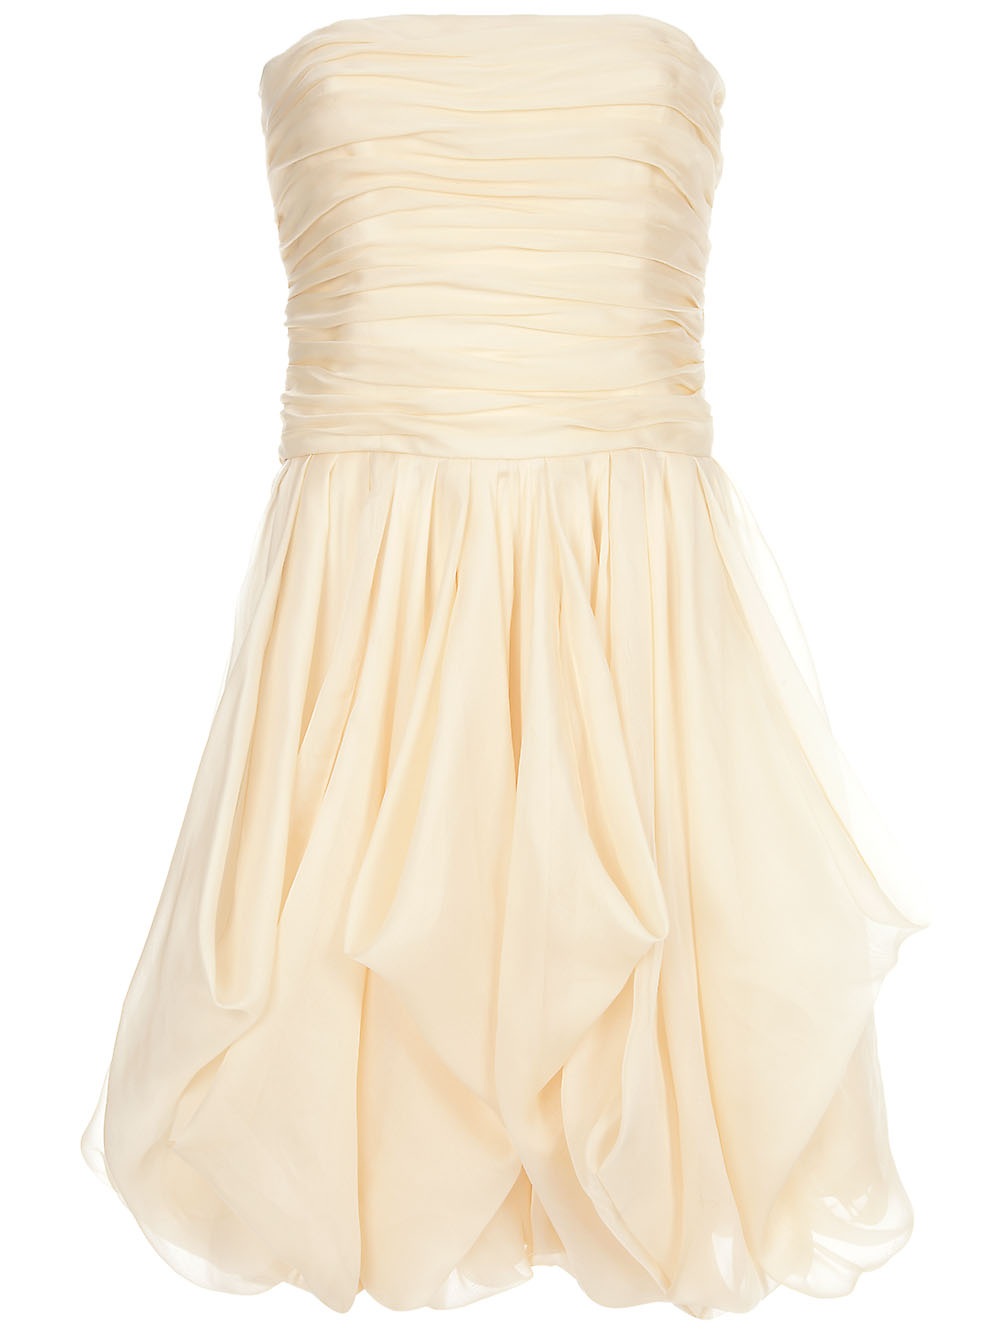 DIARY OF A CLOTHESHORSE: SUMMER COCKTAIL DRESSES FROM RALPH LAUREN ...